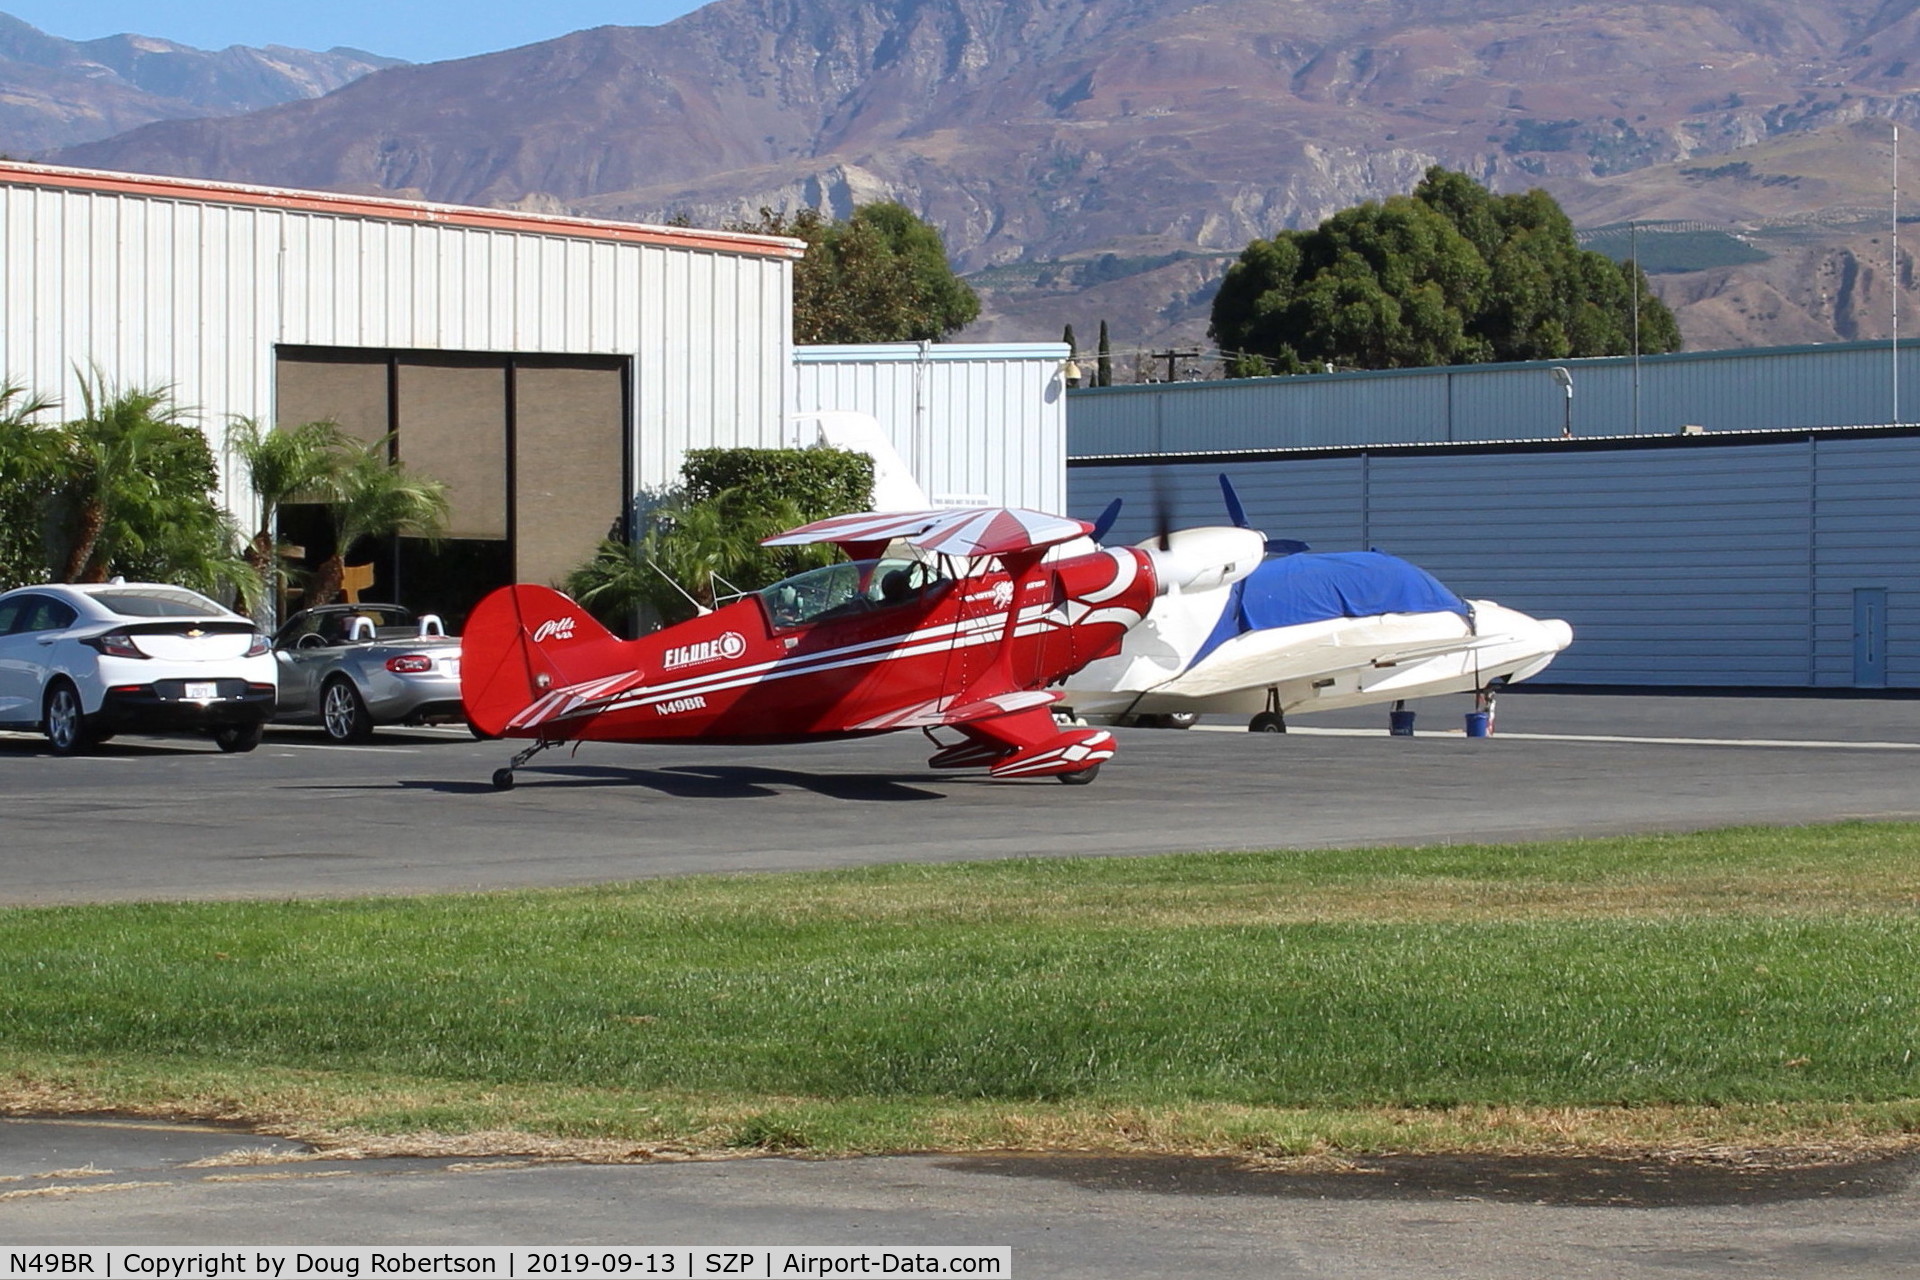 N49BR, Pitts S-2A Special C/N 2212, 1983 Aerotek PITTS S-2A SPECIAL, Lycomng AEIO-360 180 Hp, taxi to Rwy 04